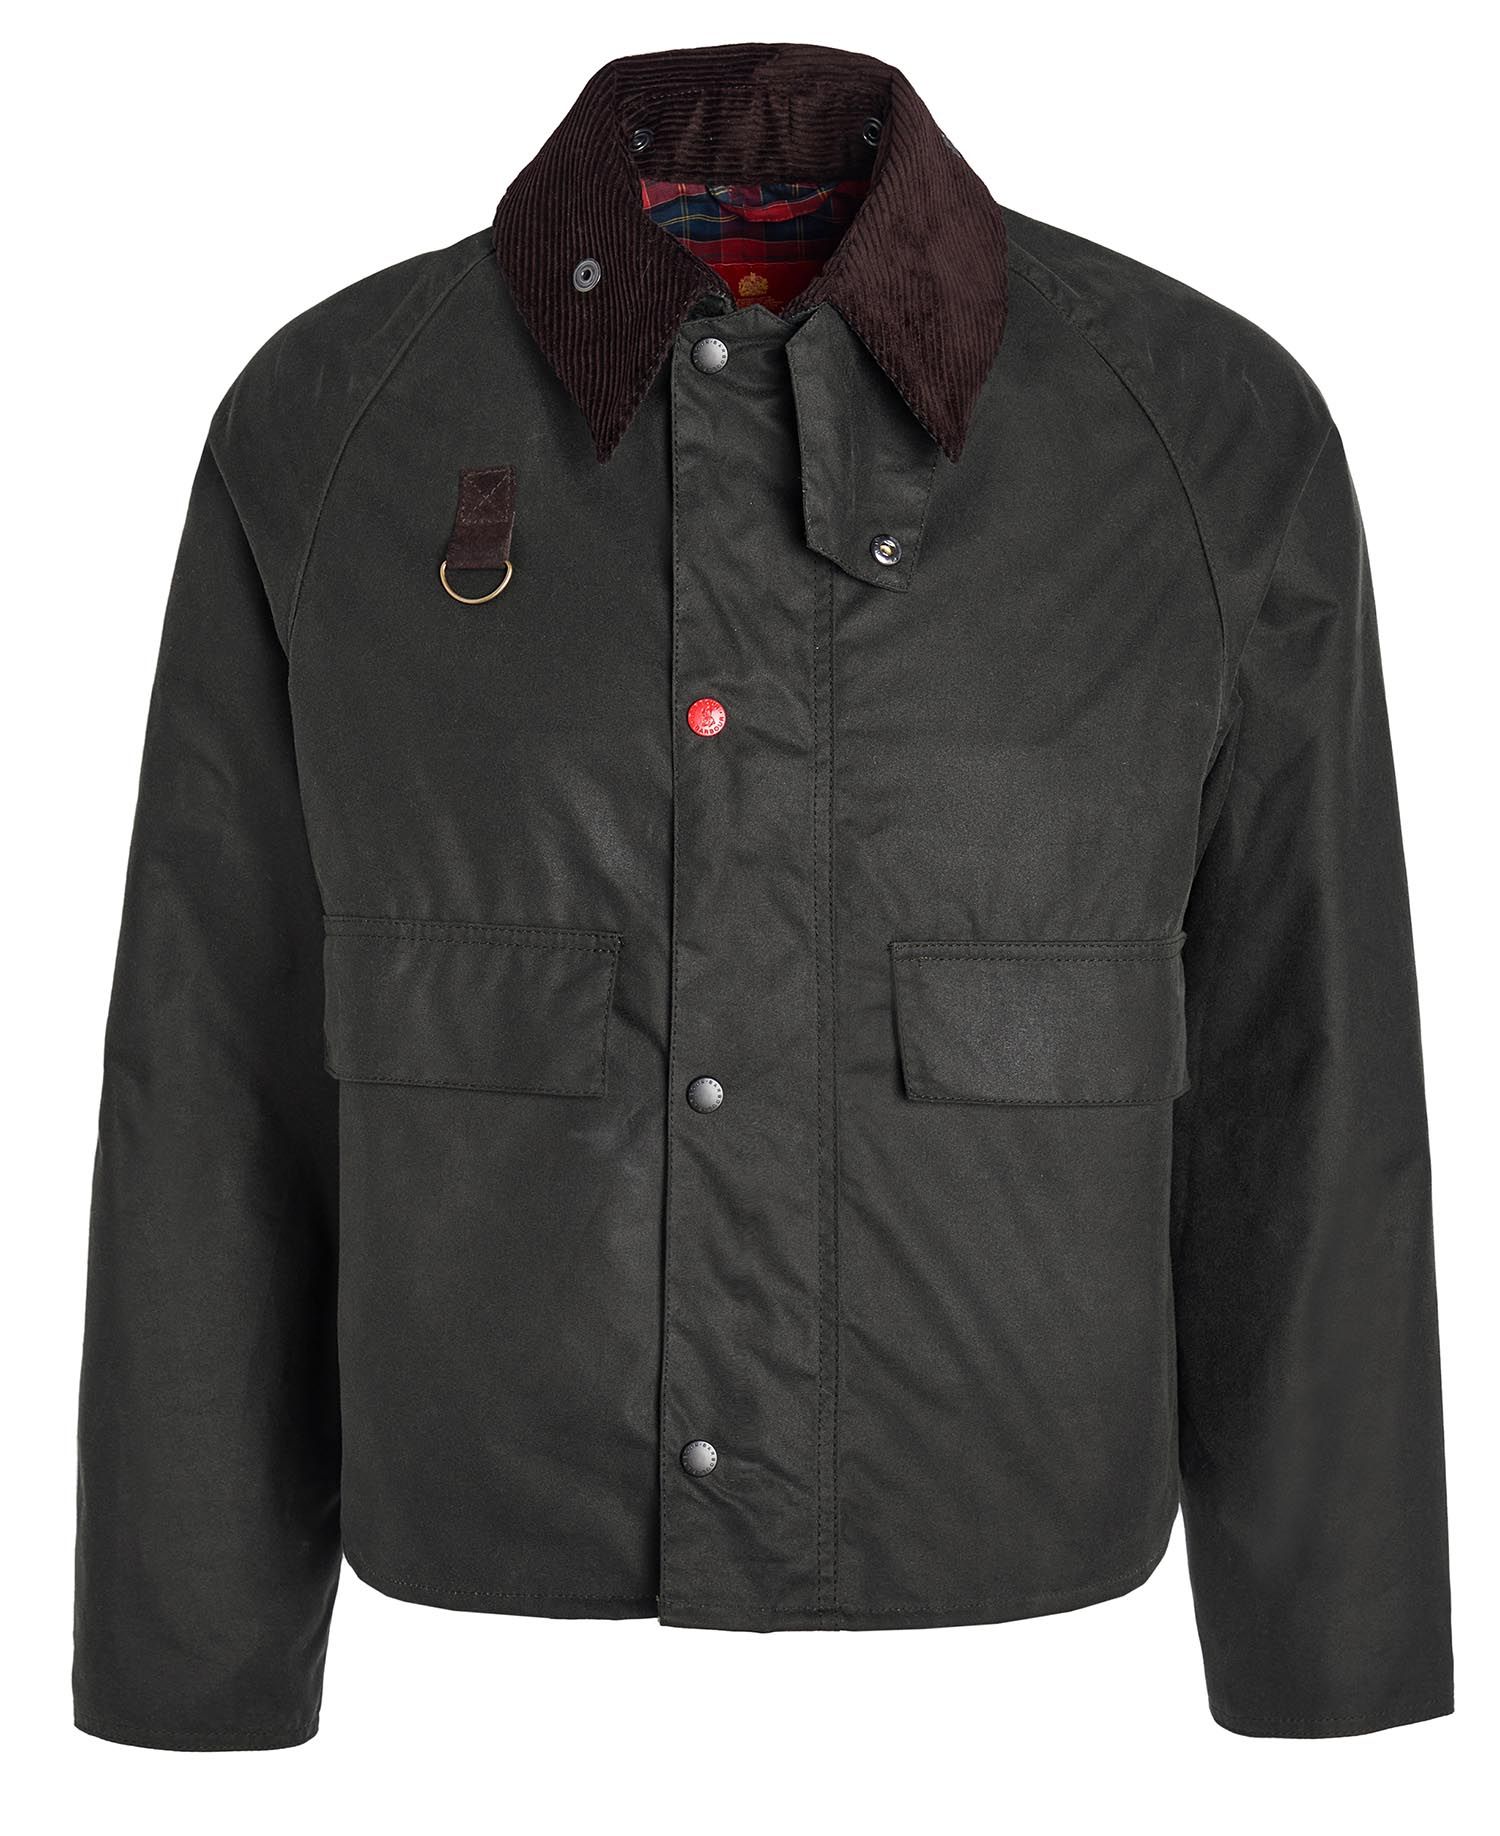 Shop the Barbour Lunar Spey Wax Jacket today. | Barbour